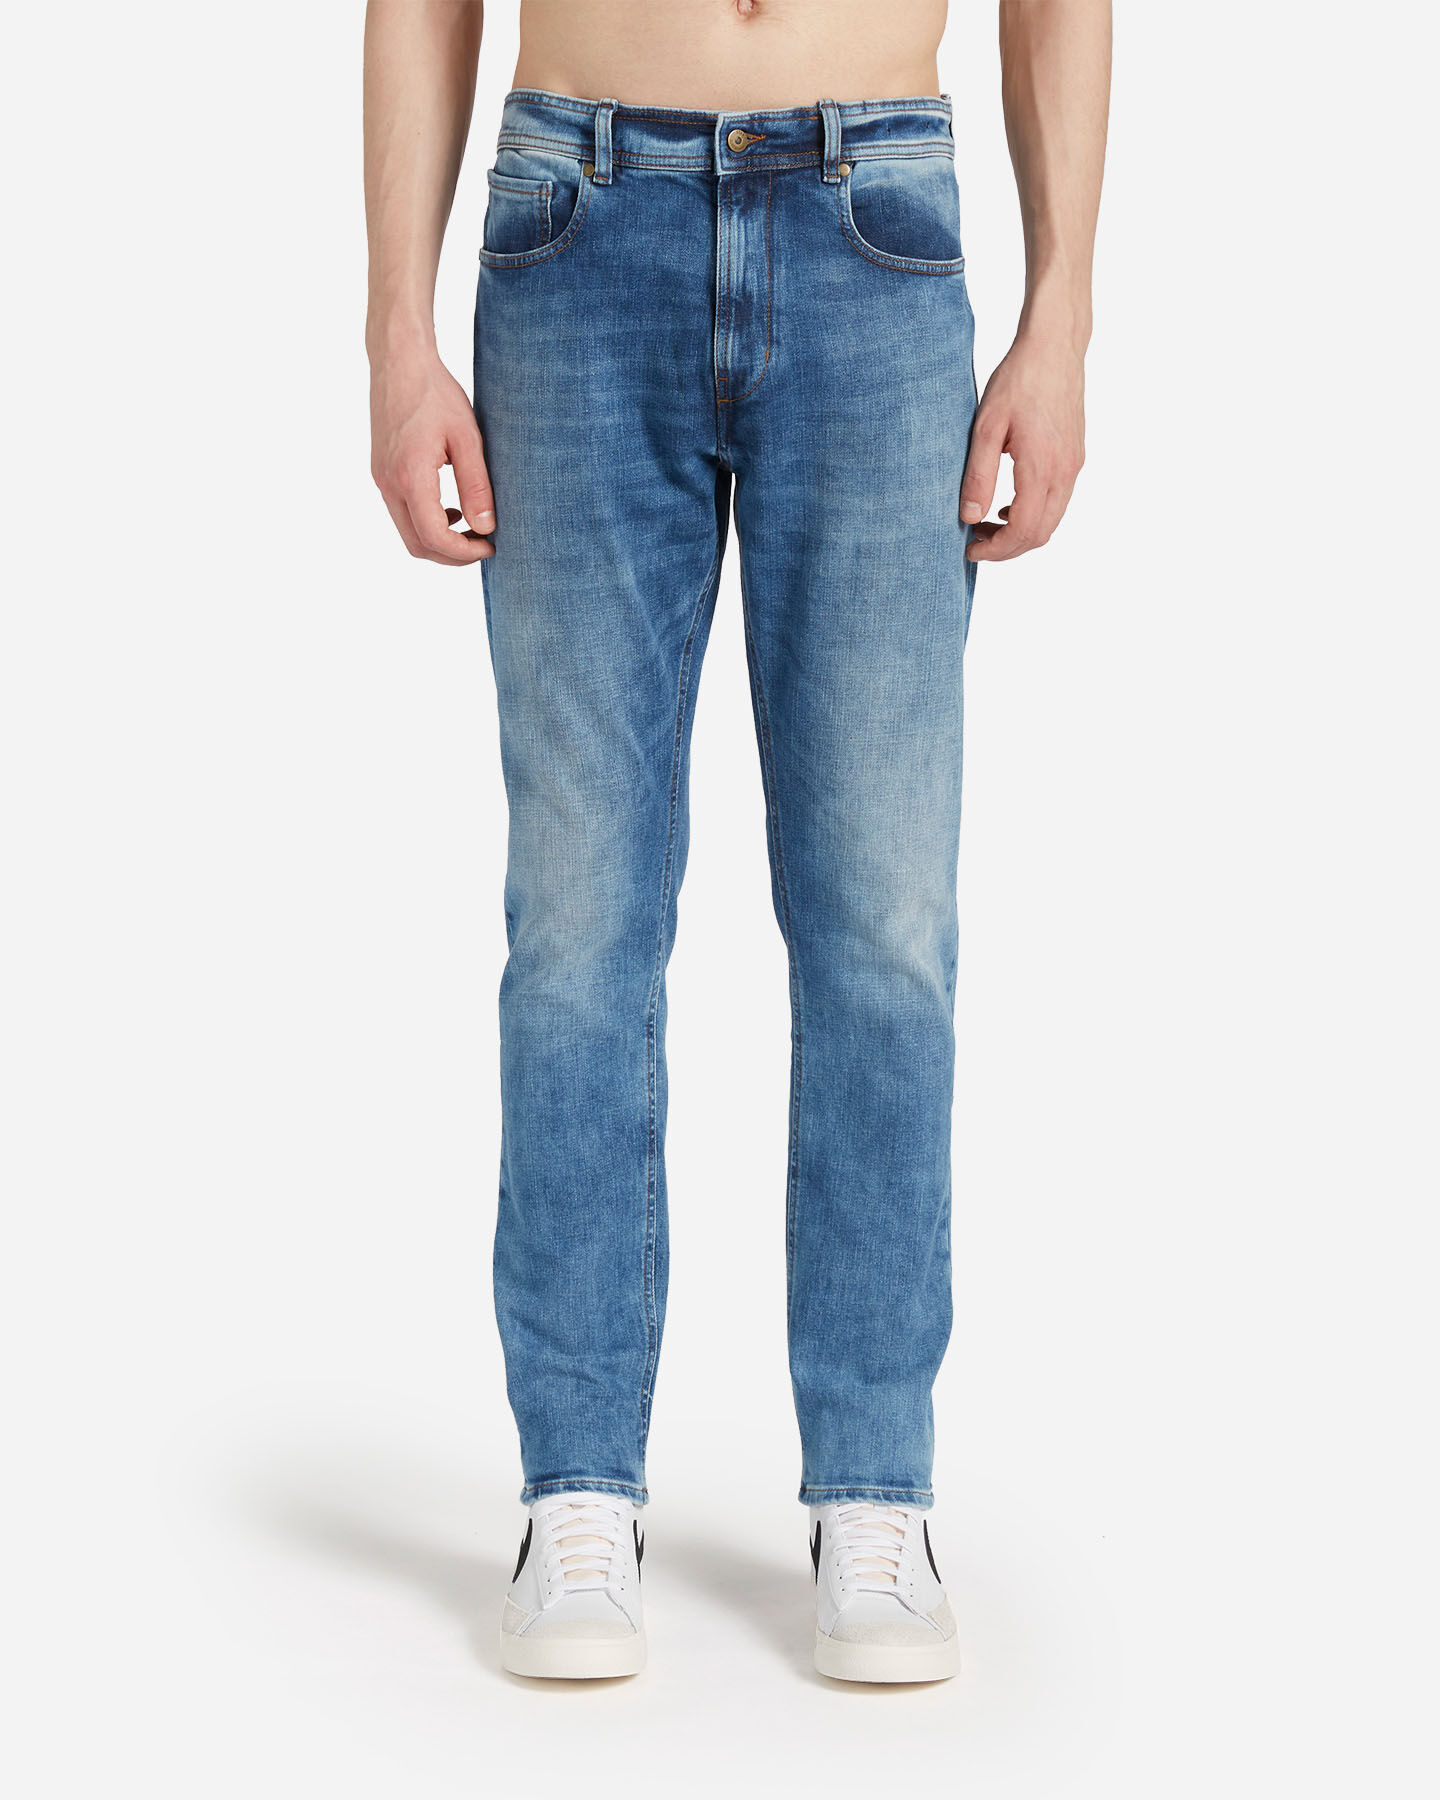  Jeans BEAR SURFER CONCEPT M S4122064|MD|44 scatto 0